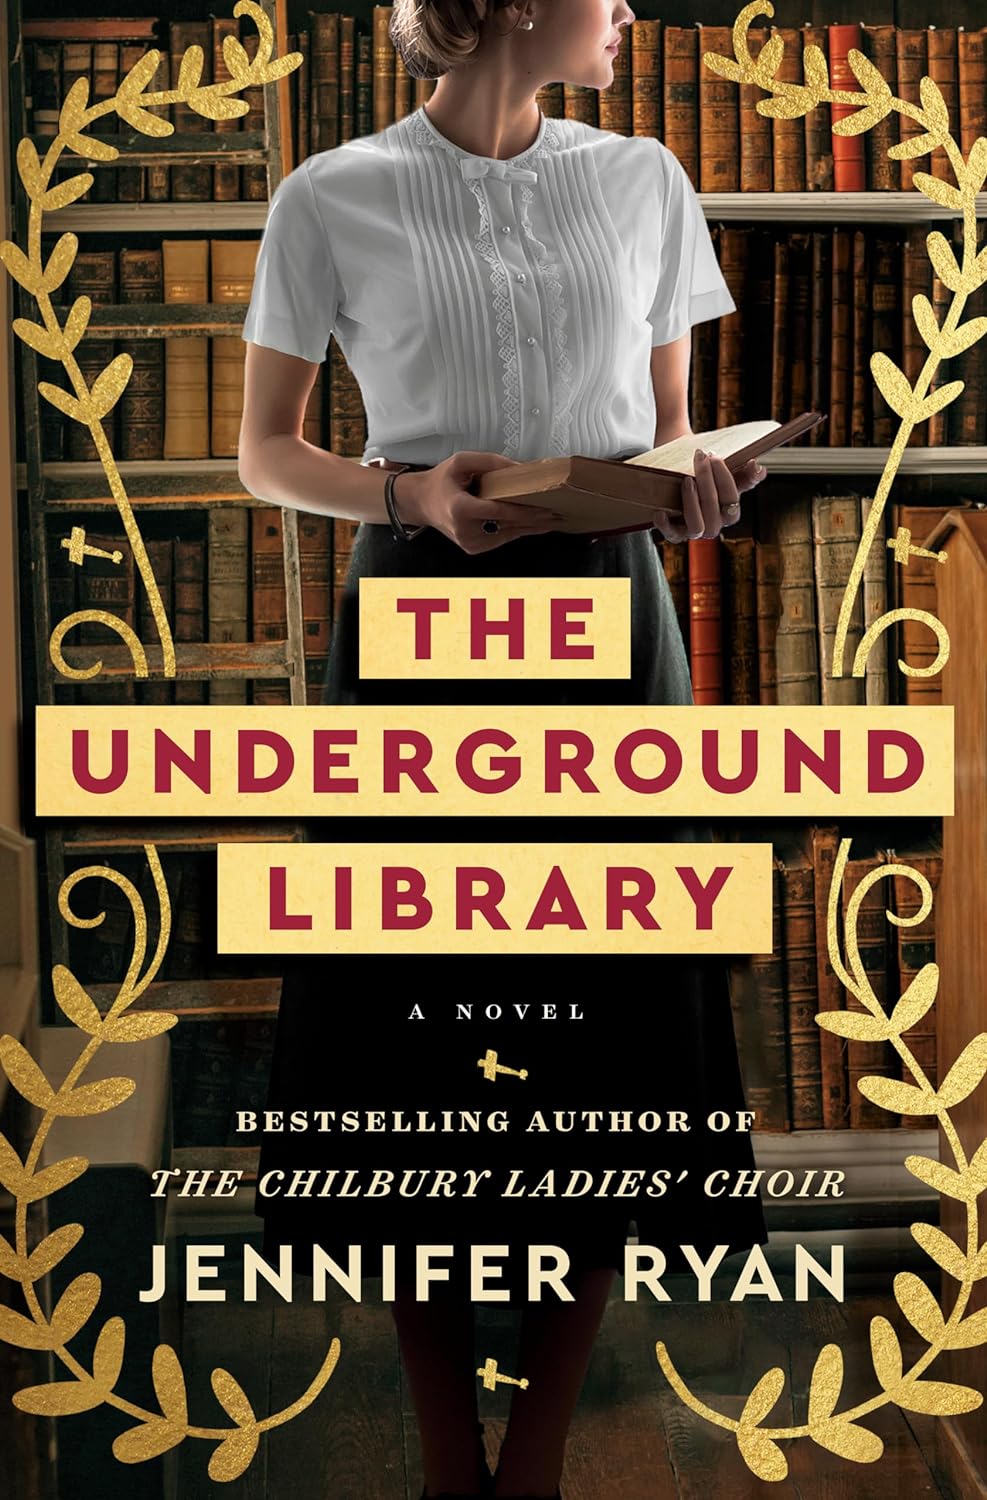 Image for "The Underground Library"